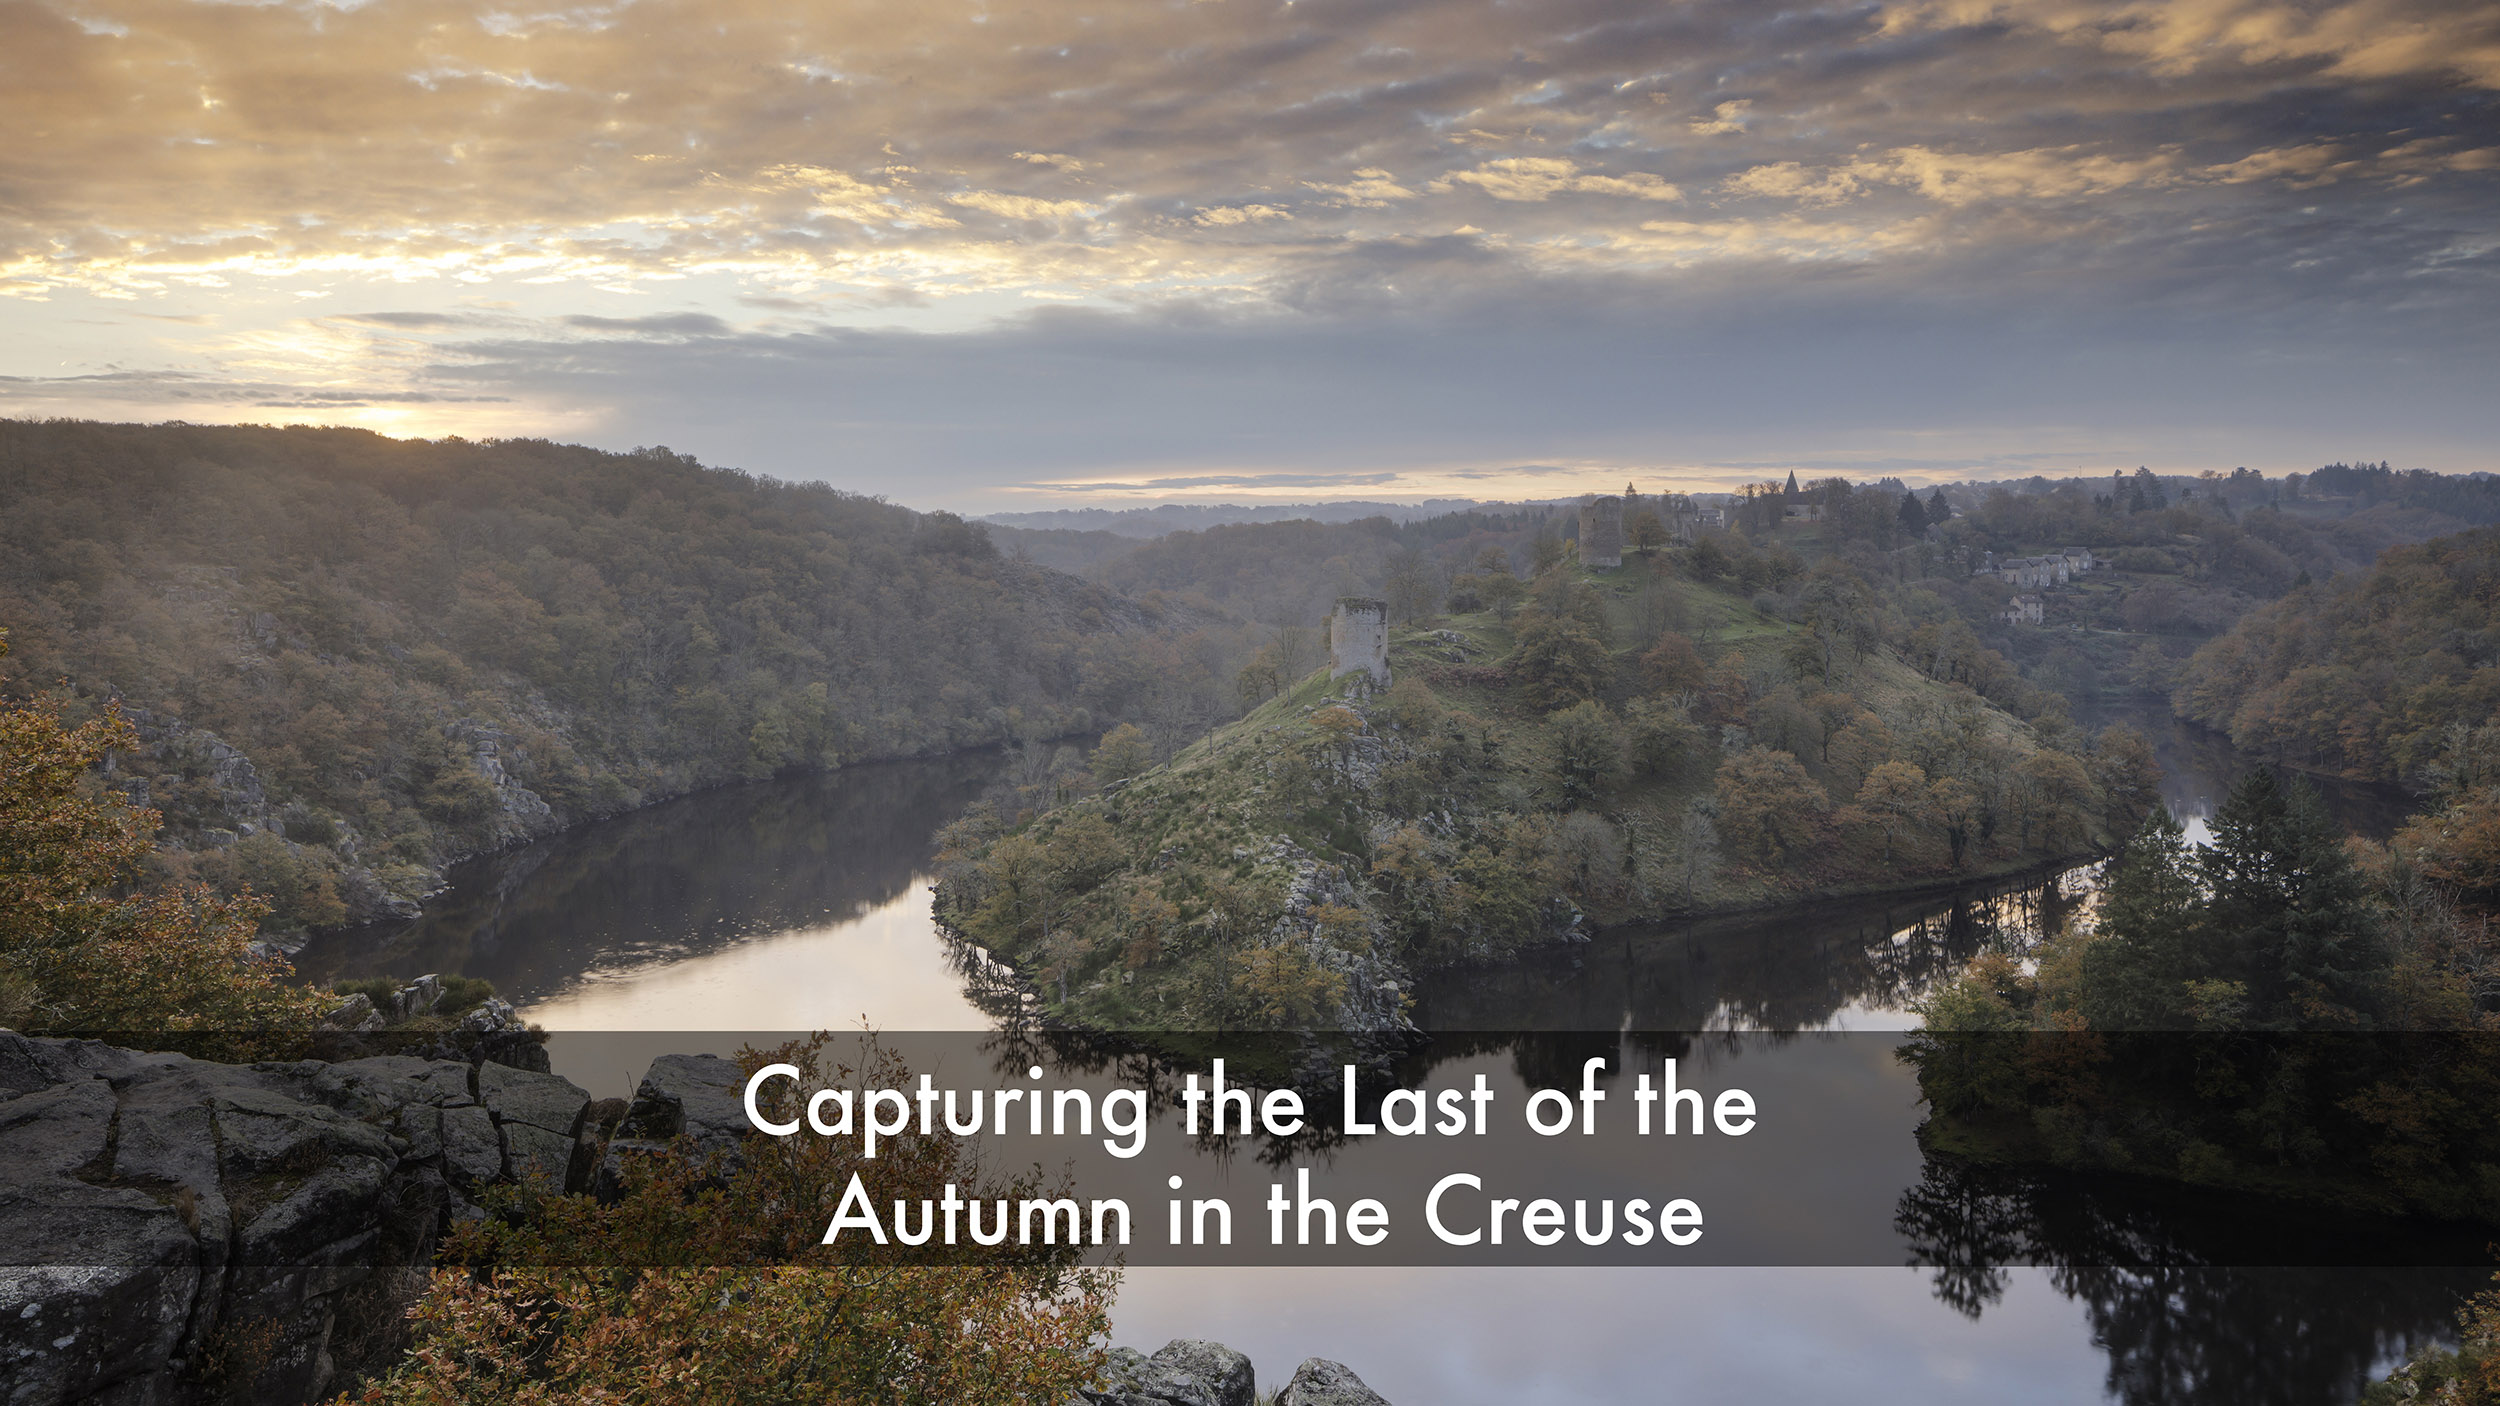 Capturing the last of the autumn in the Creuse.